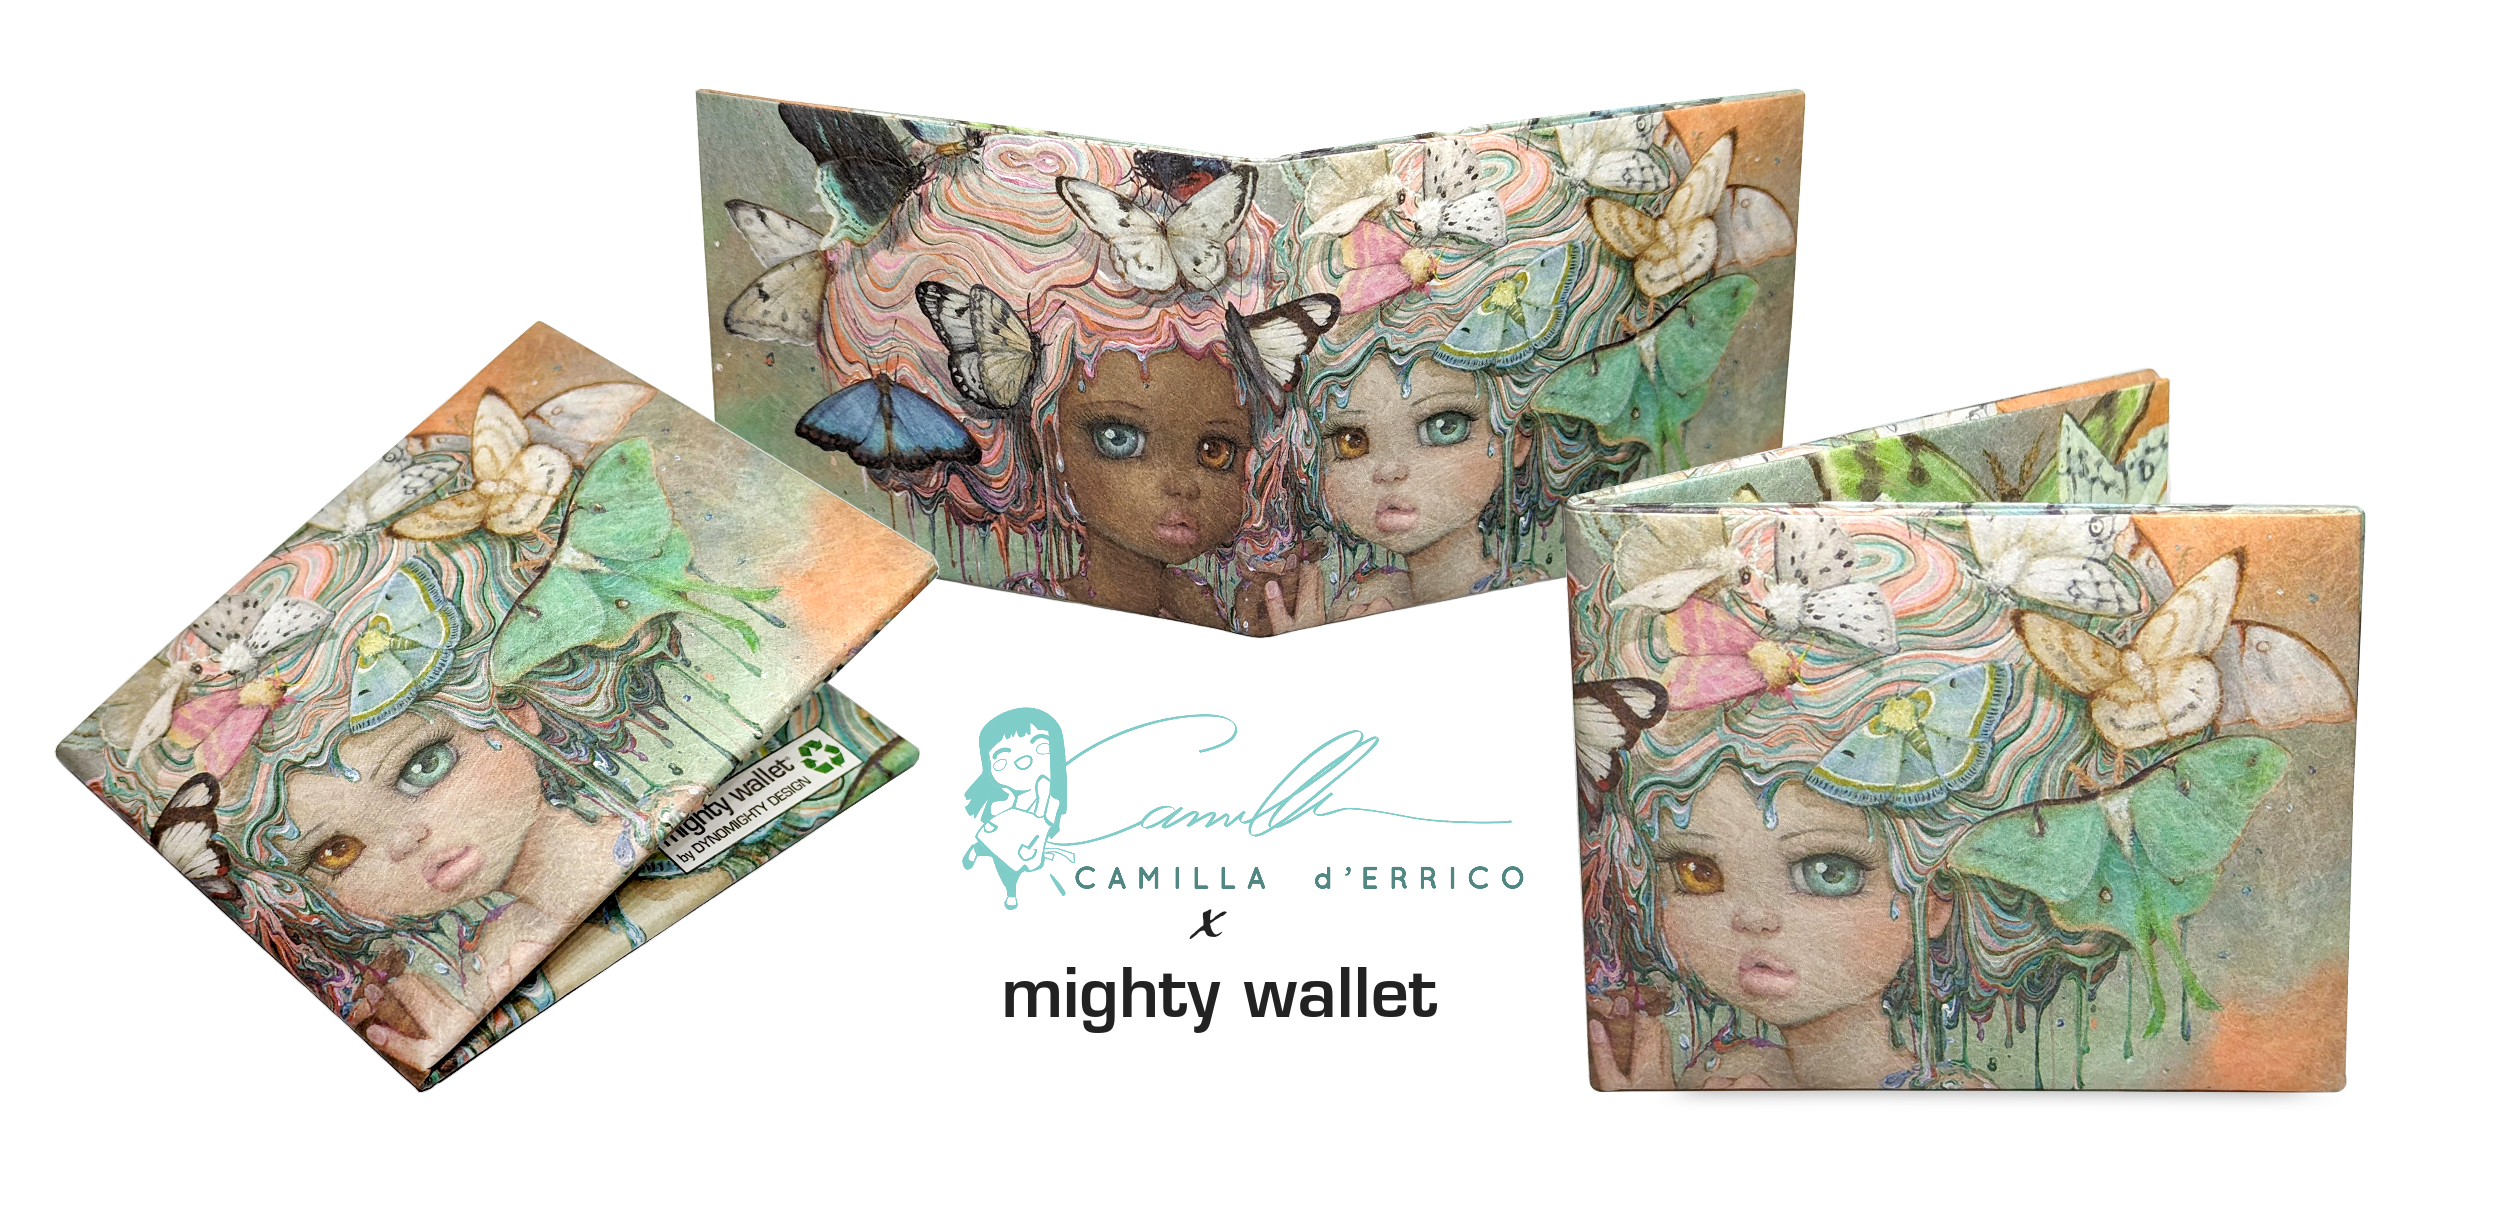 Celebrating Artistry and Unity: The Camilla d'Errico x Mighty Wallet Collaboration